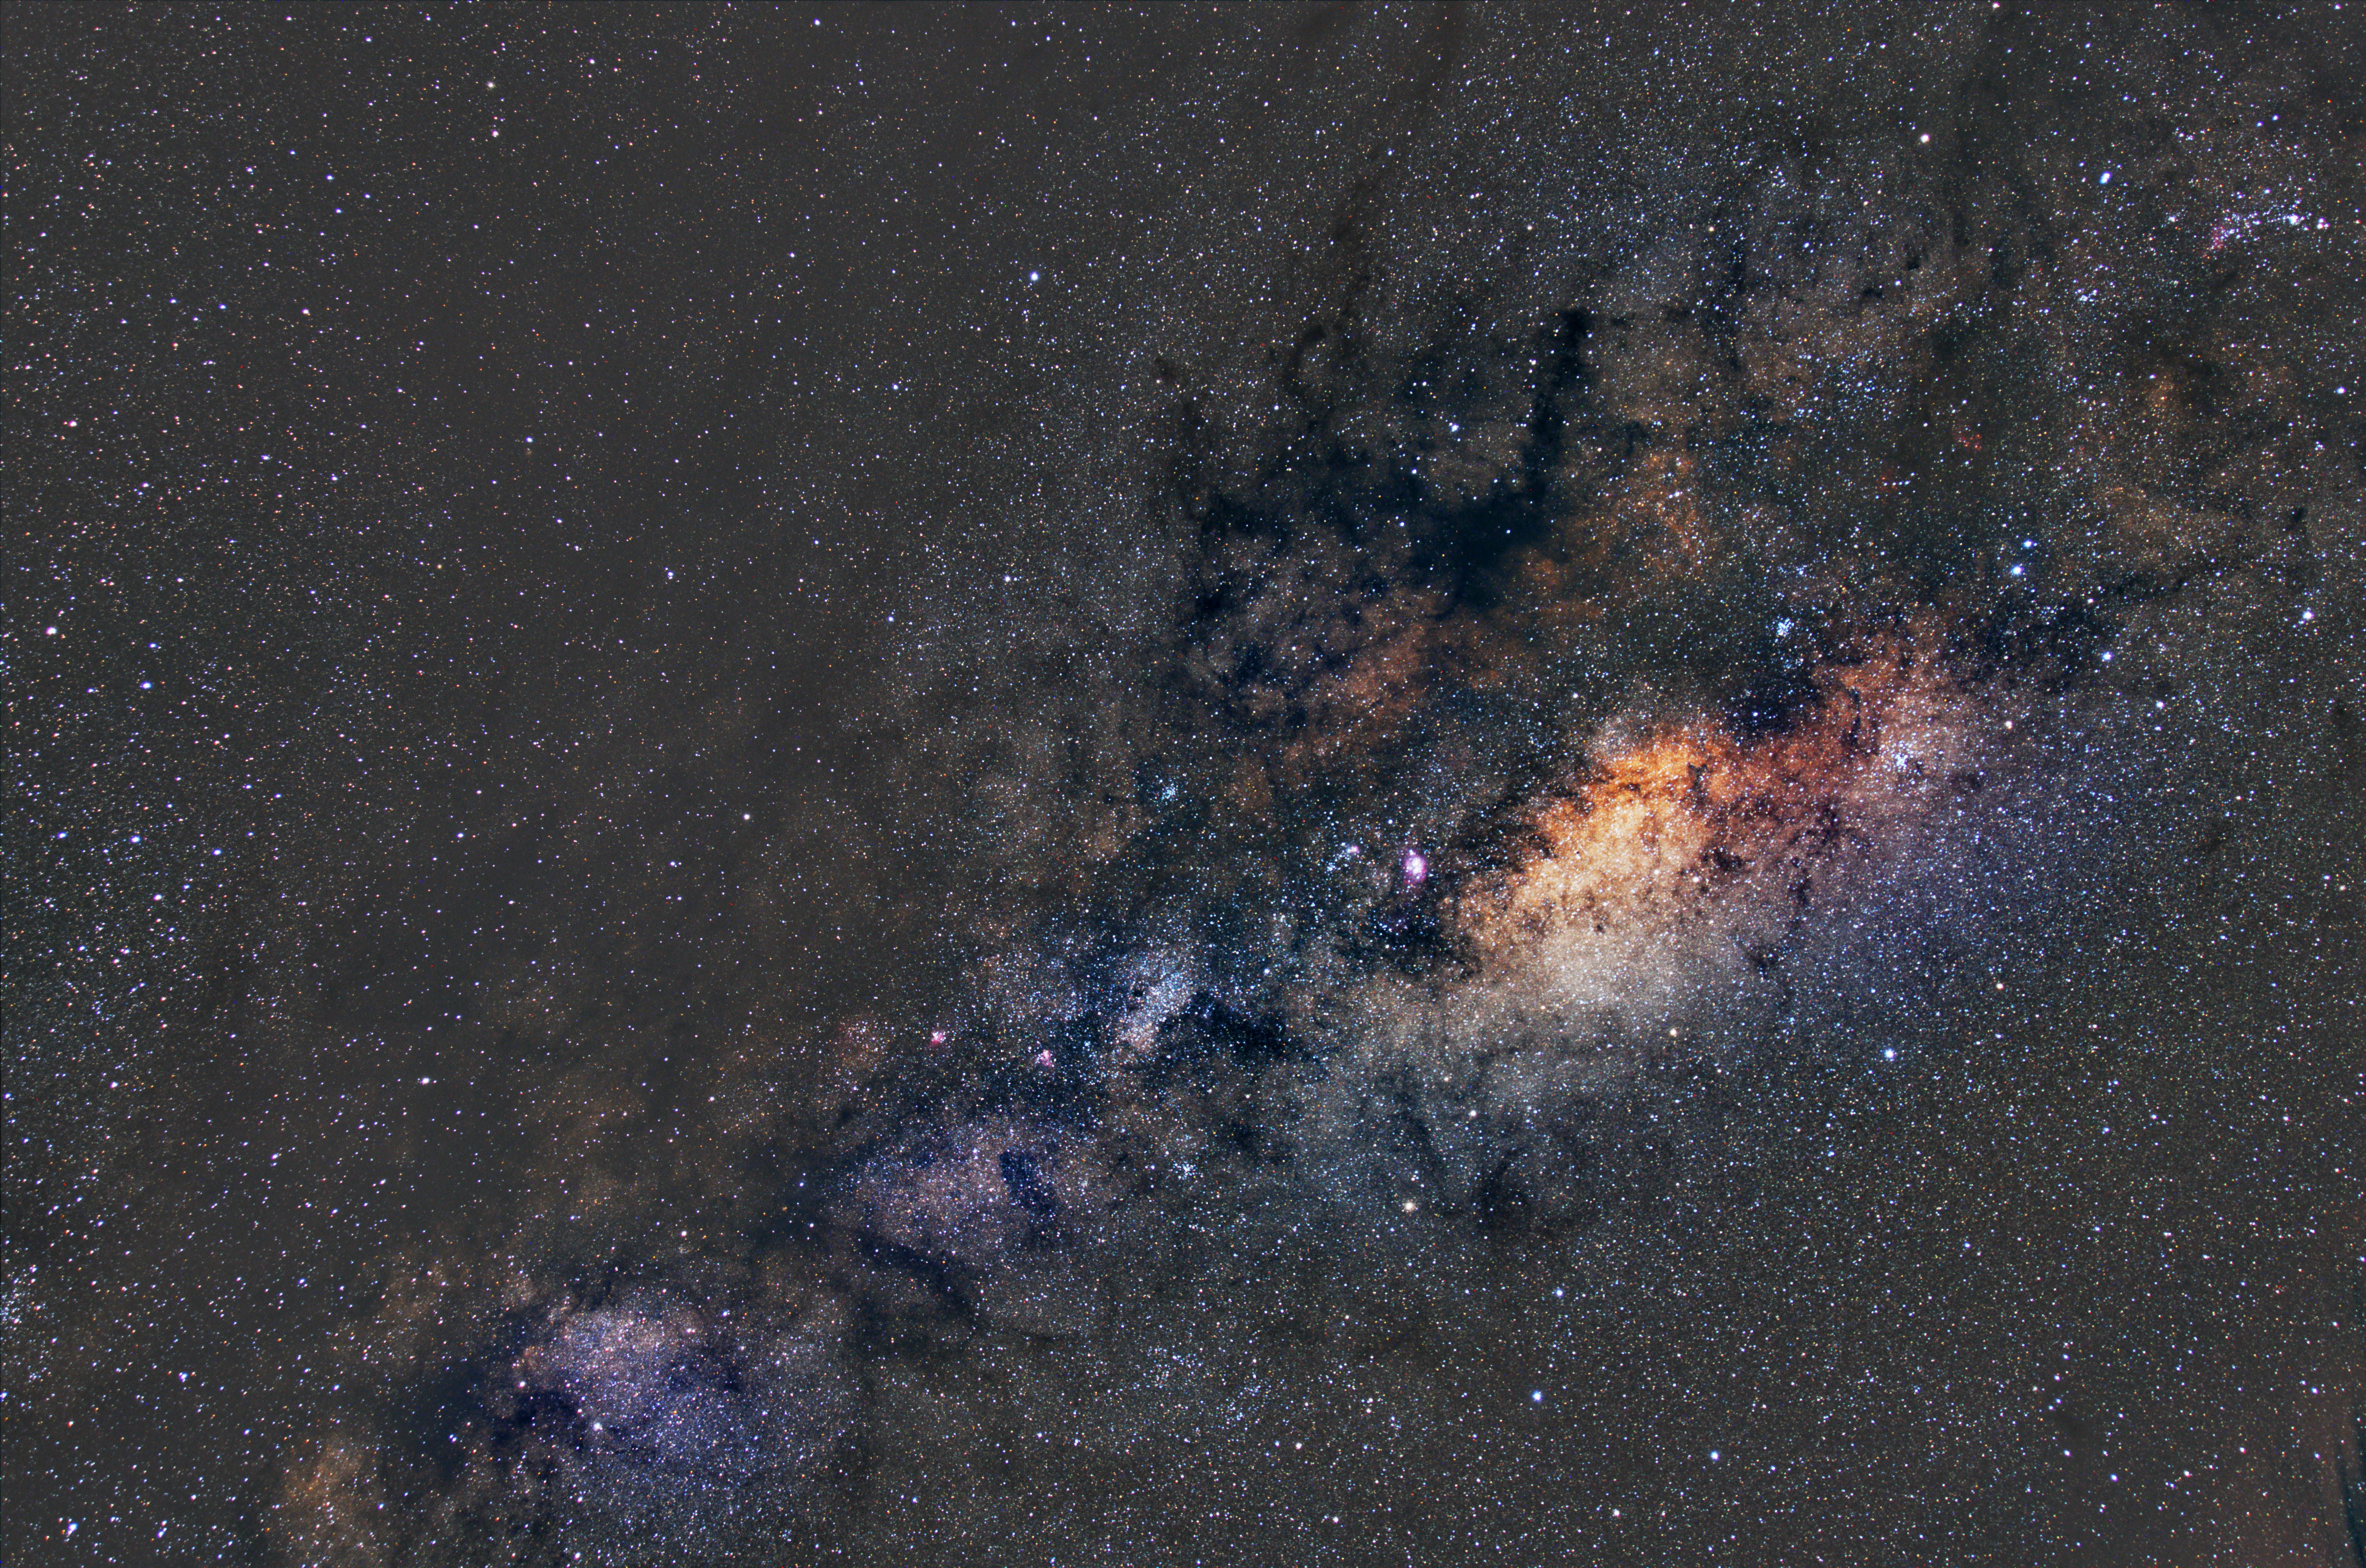 24mm wide field of Lagoon Nebula in our Milky Way